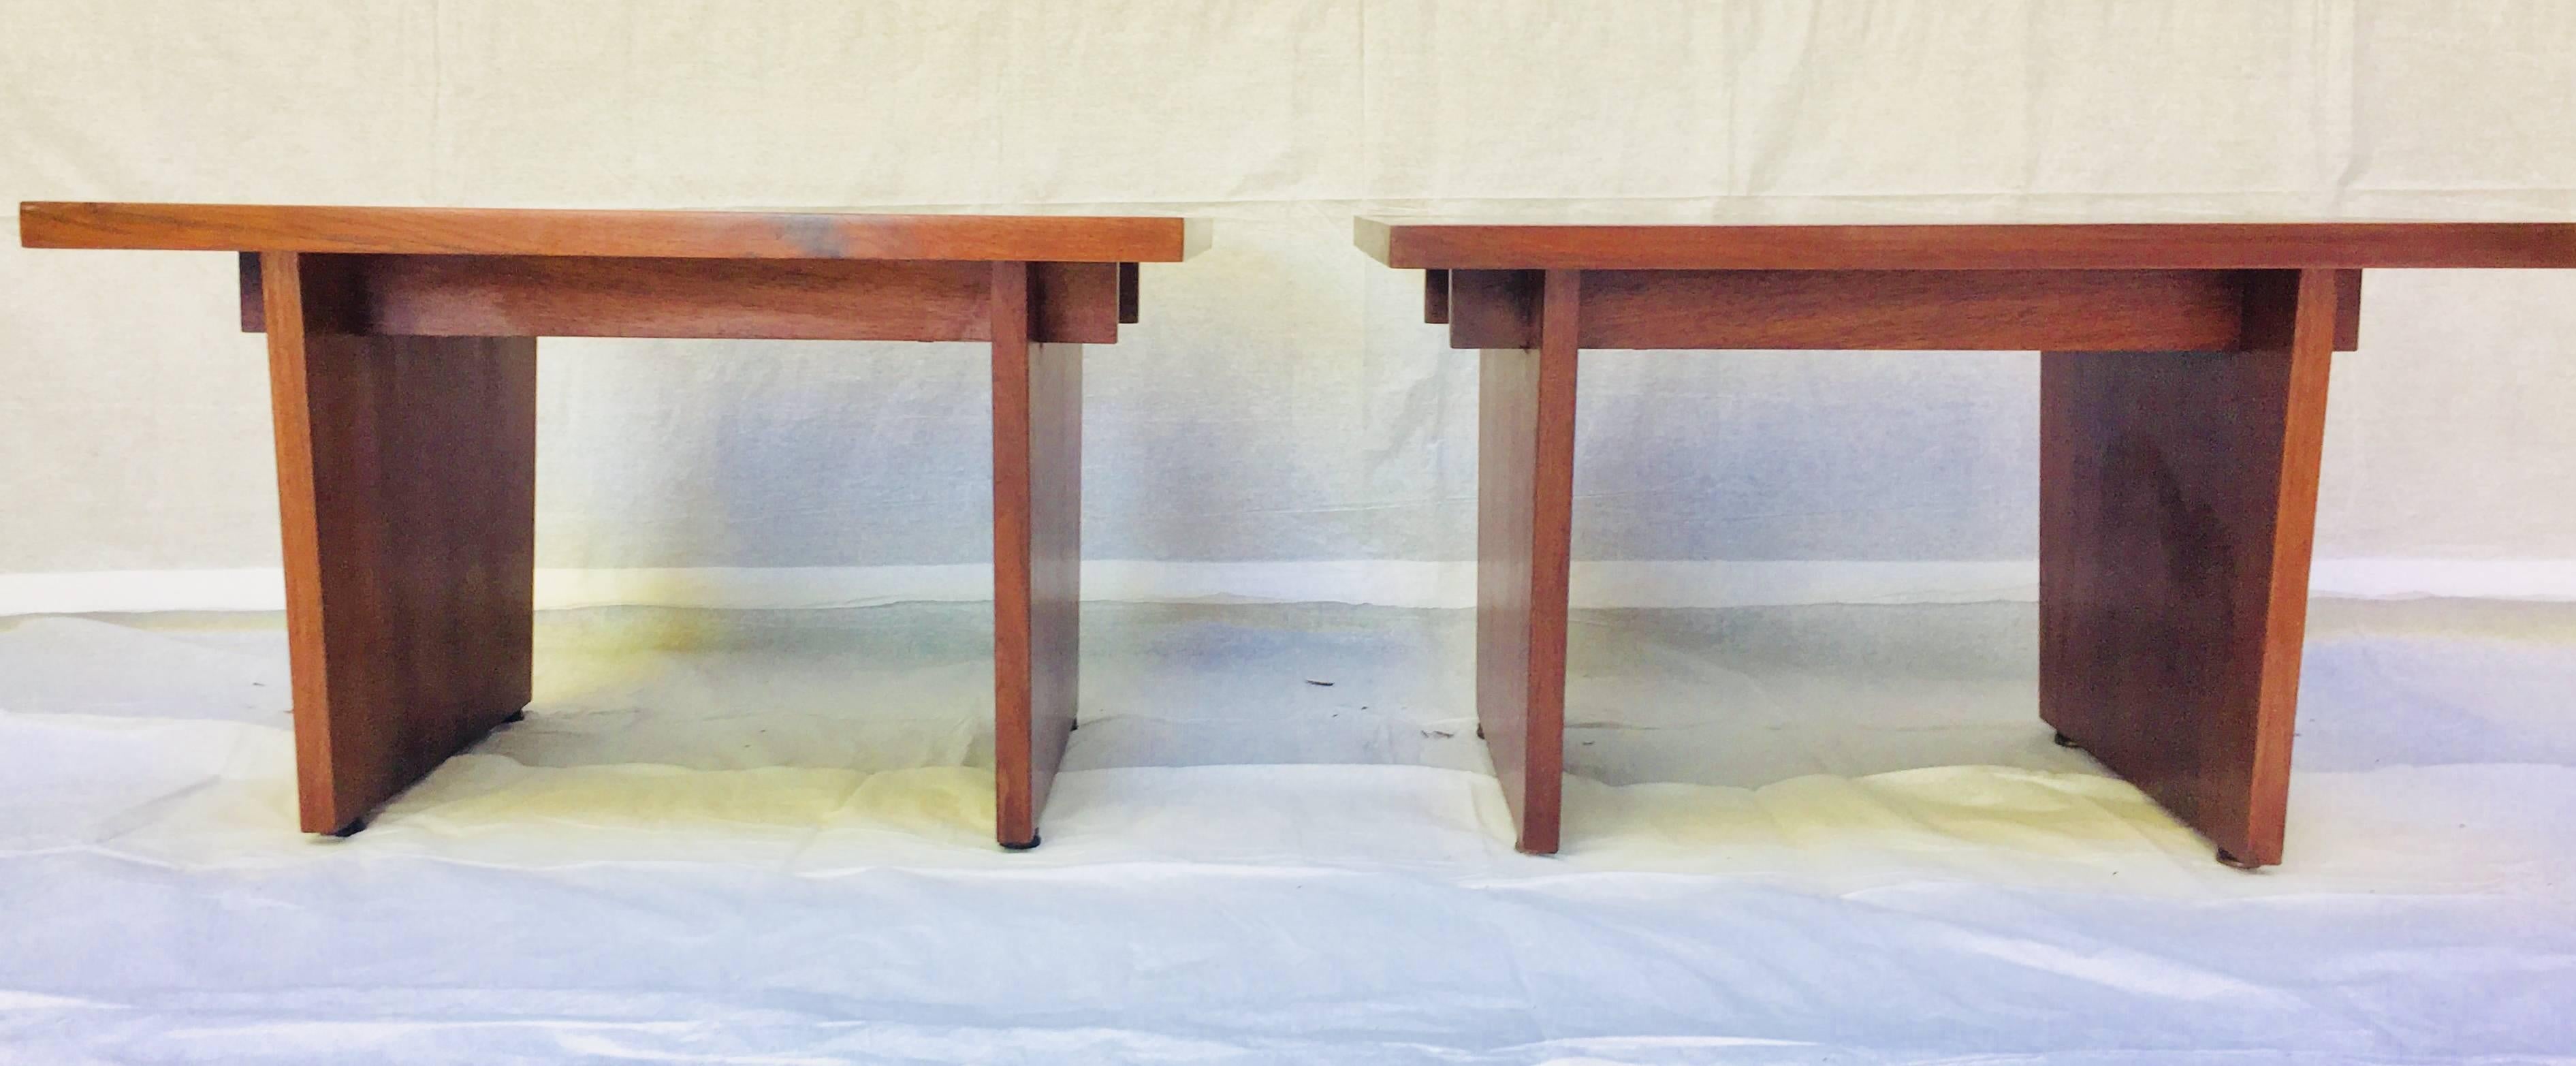 Mid-Century Modern End tables by Frank Rohloff, Walnut with Black inset, California 1960s For Sale